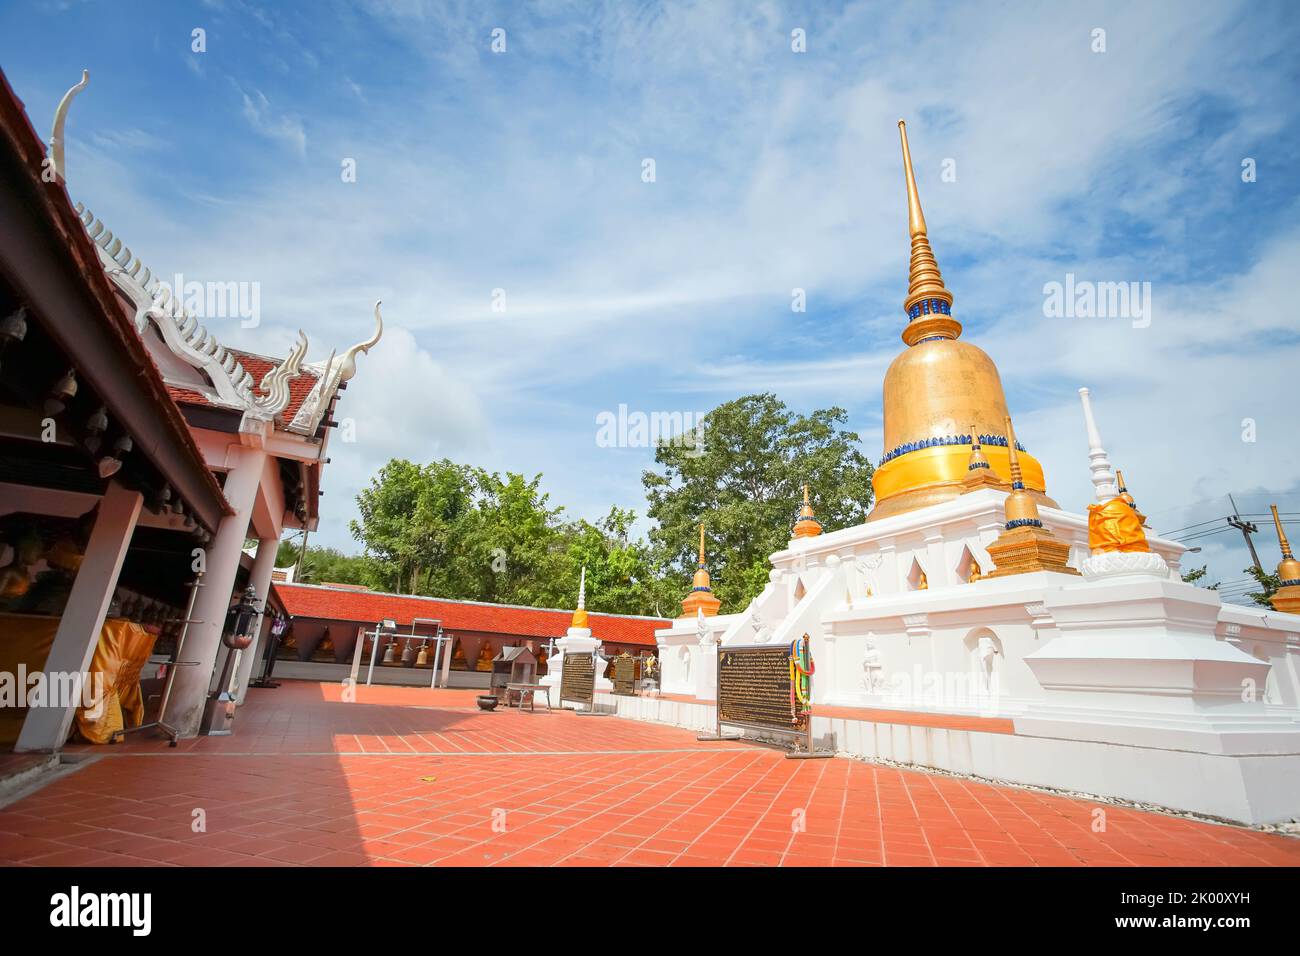 Phra That Sawi is one of travel destinations located in Wat Phra That Sawi Chumphon province, Thailand. Stock Photo